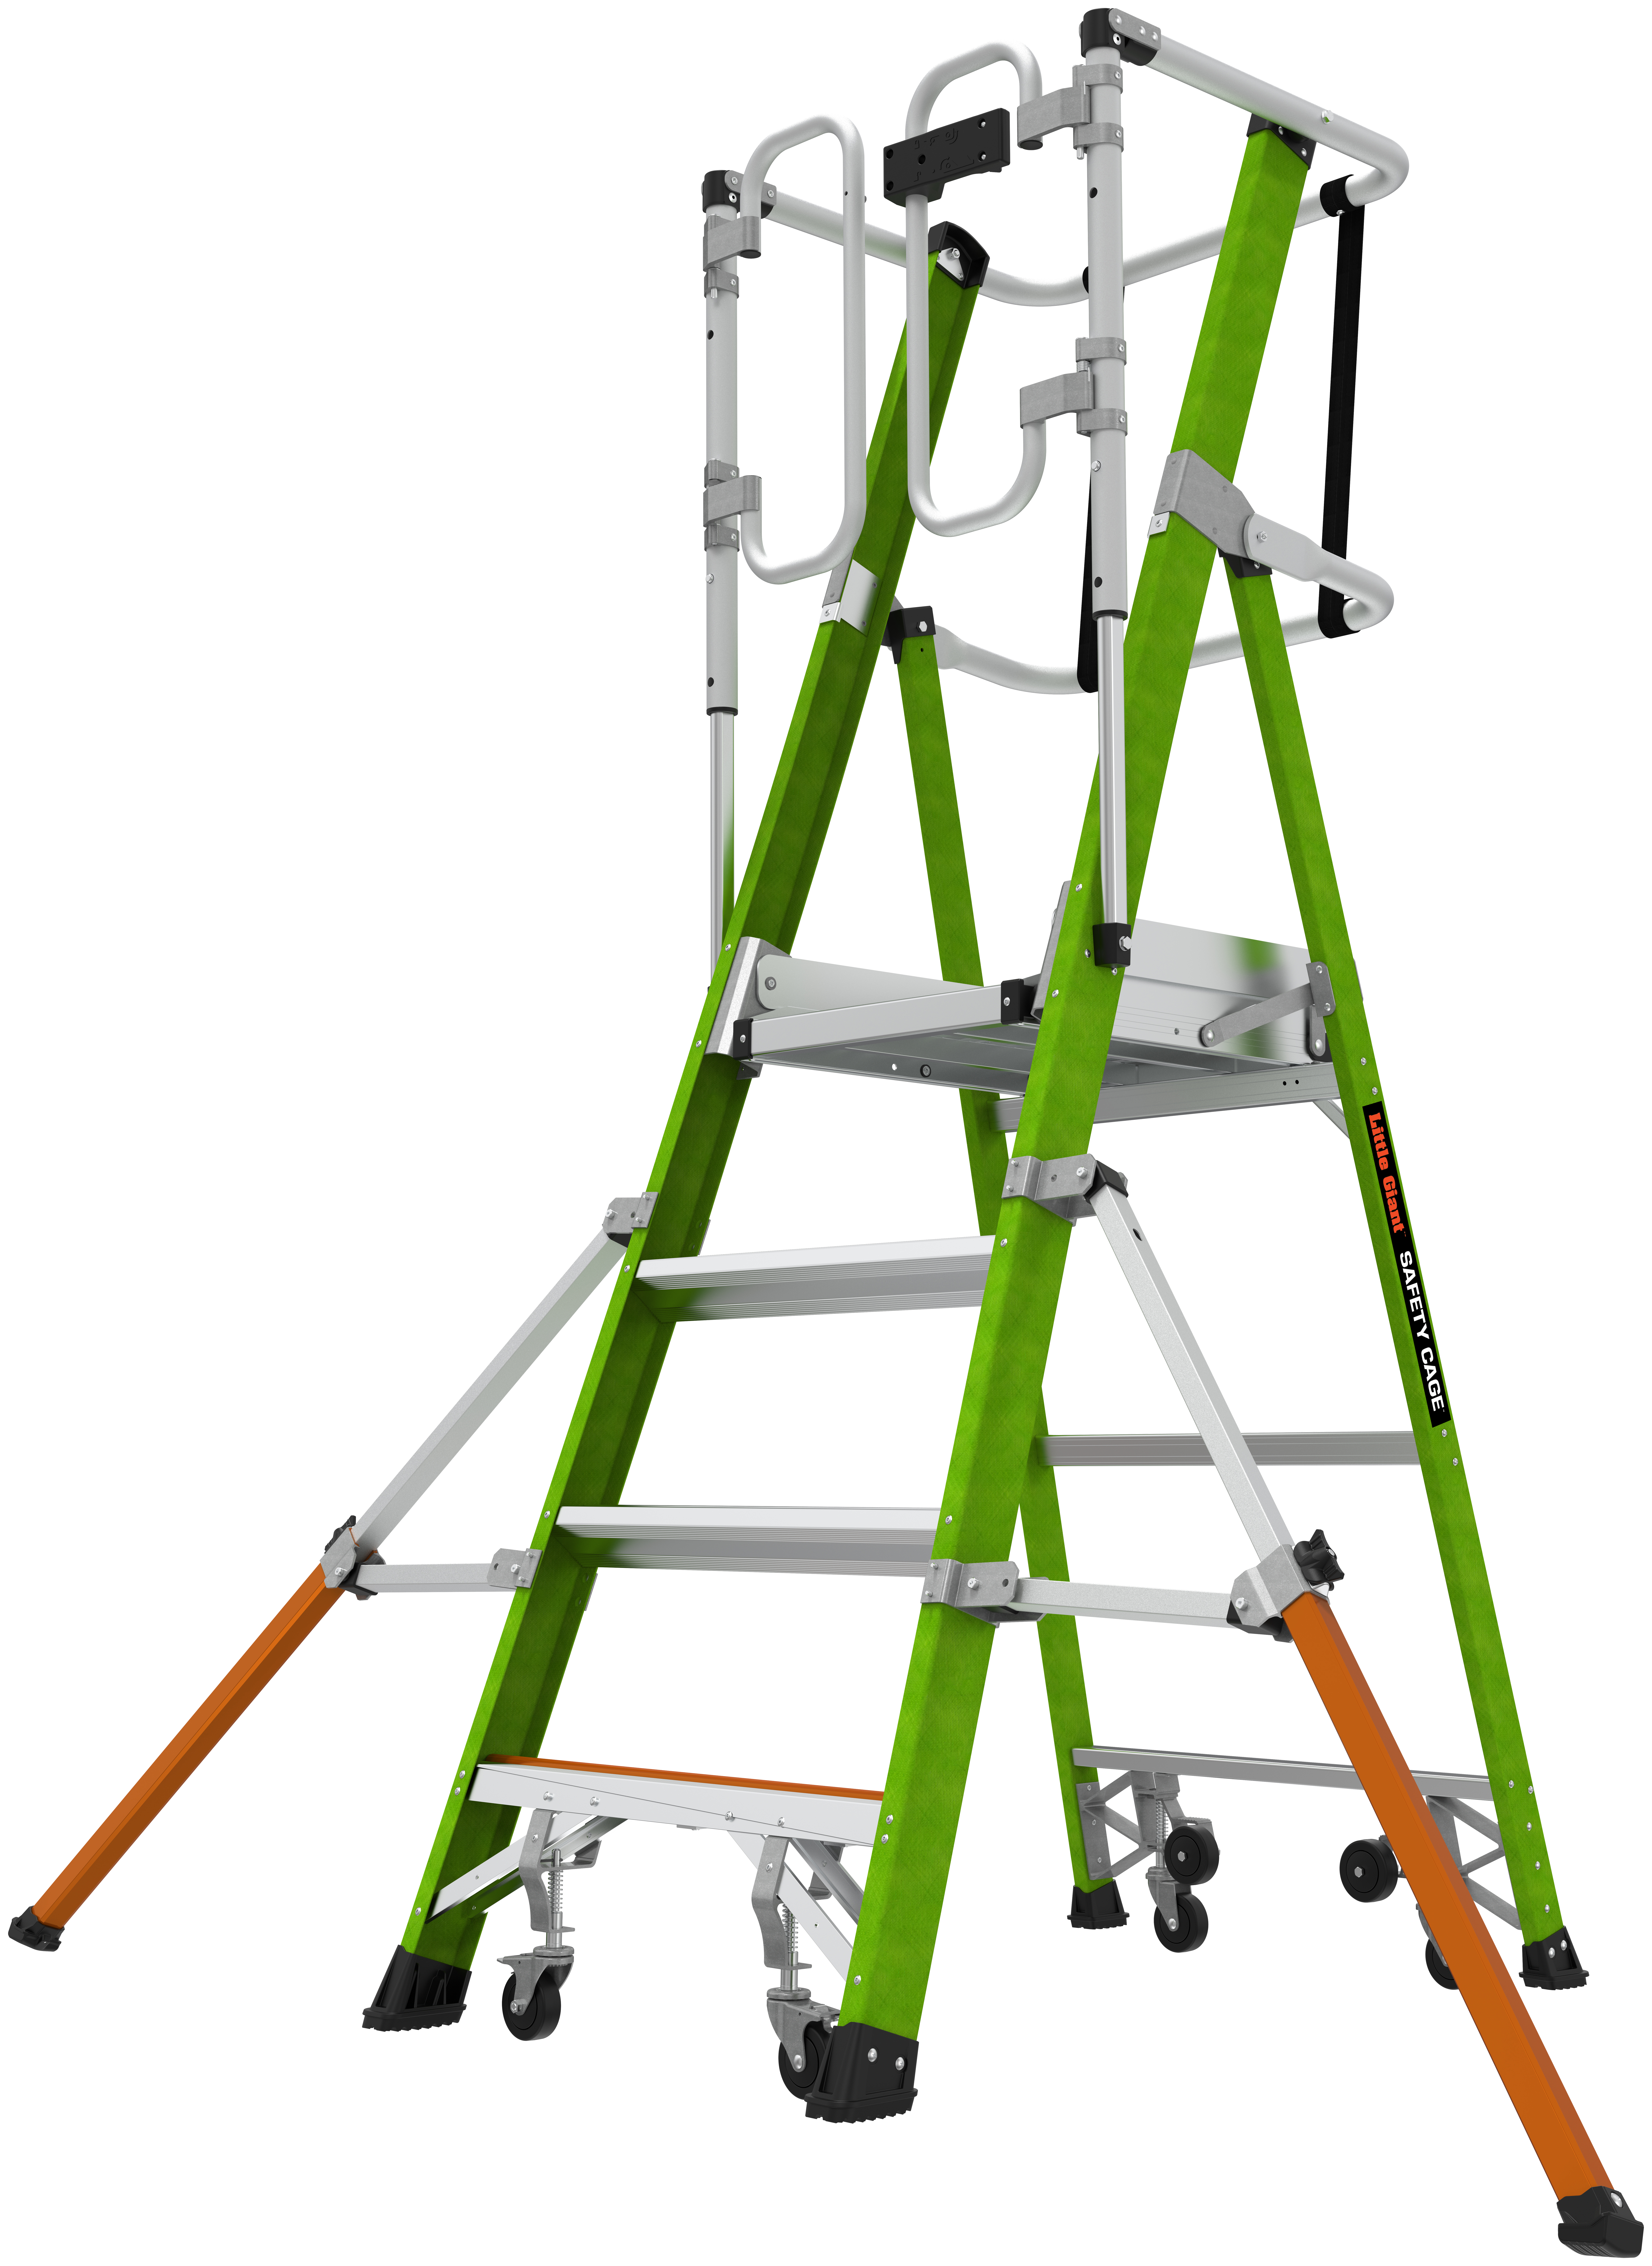 Little Giant 4 Tread Safety Cage Series 2.0 Ladder